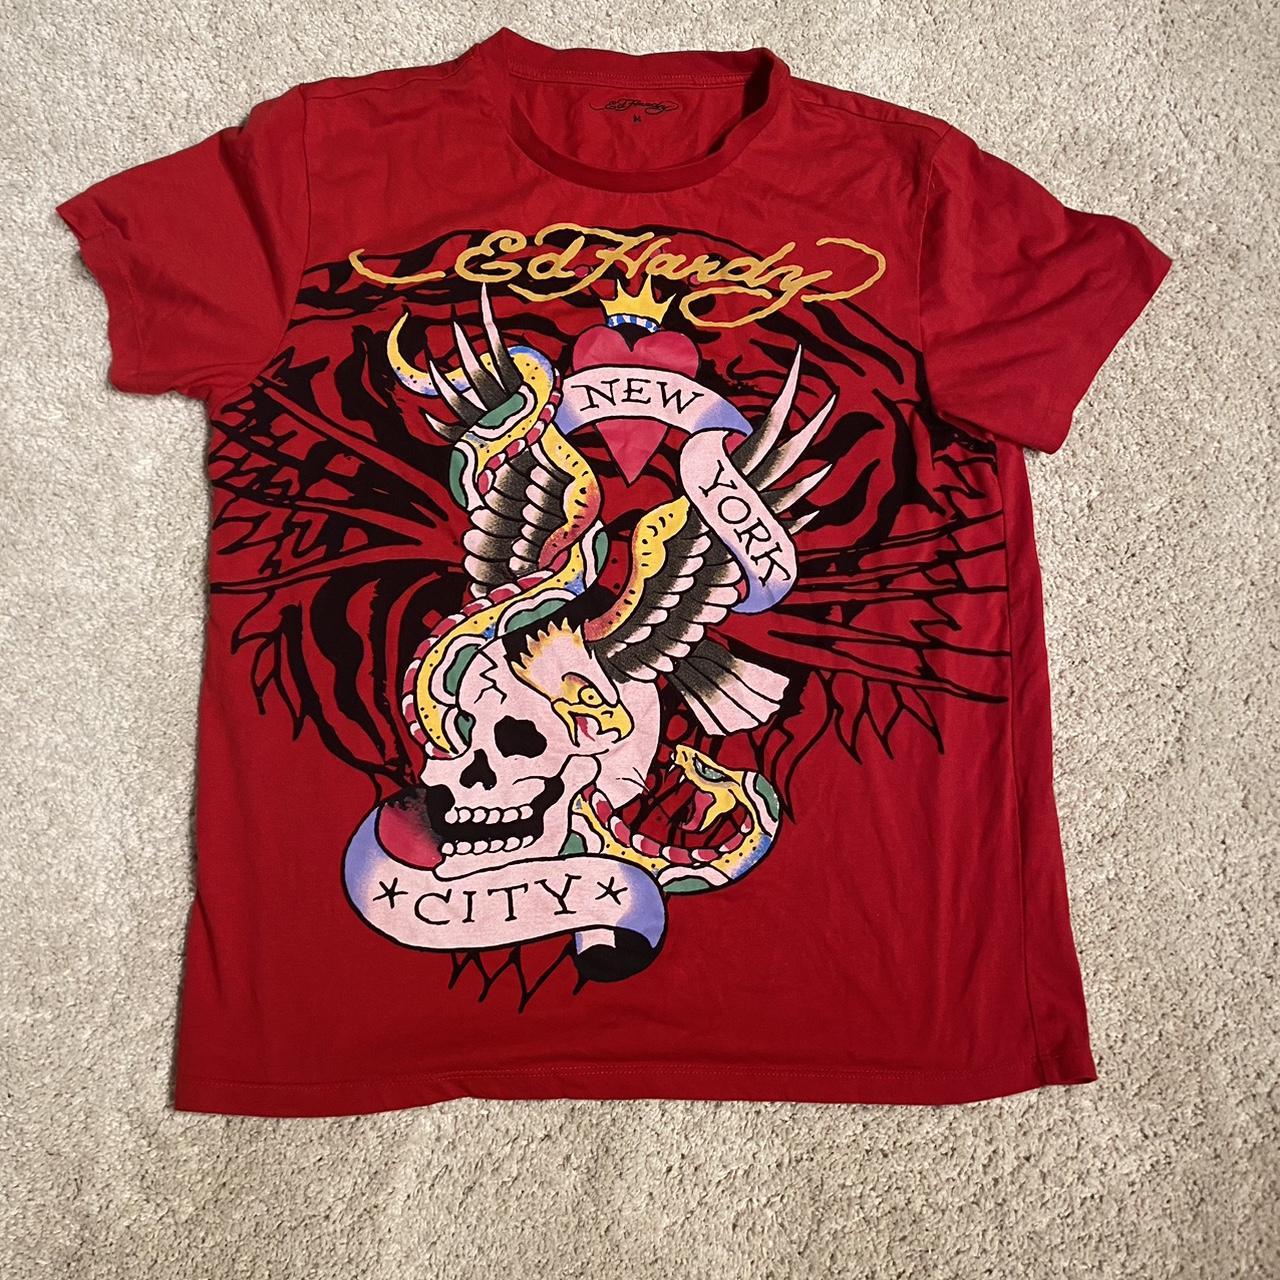 Ed Hardy Men's Red and Black T-shirt | Depop